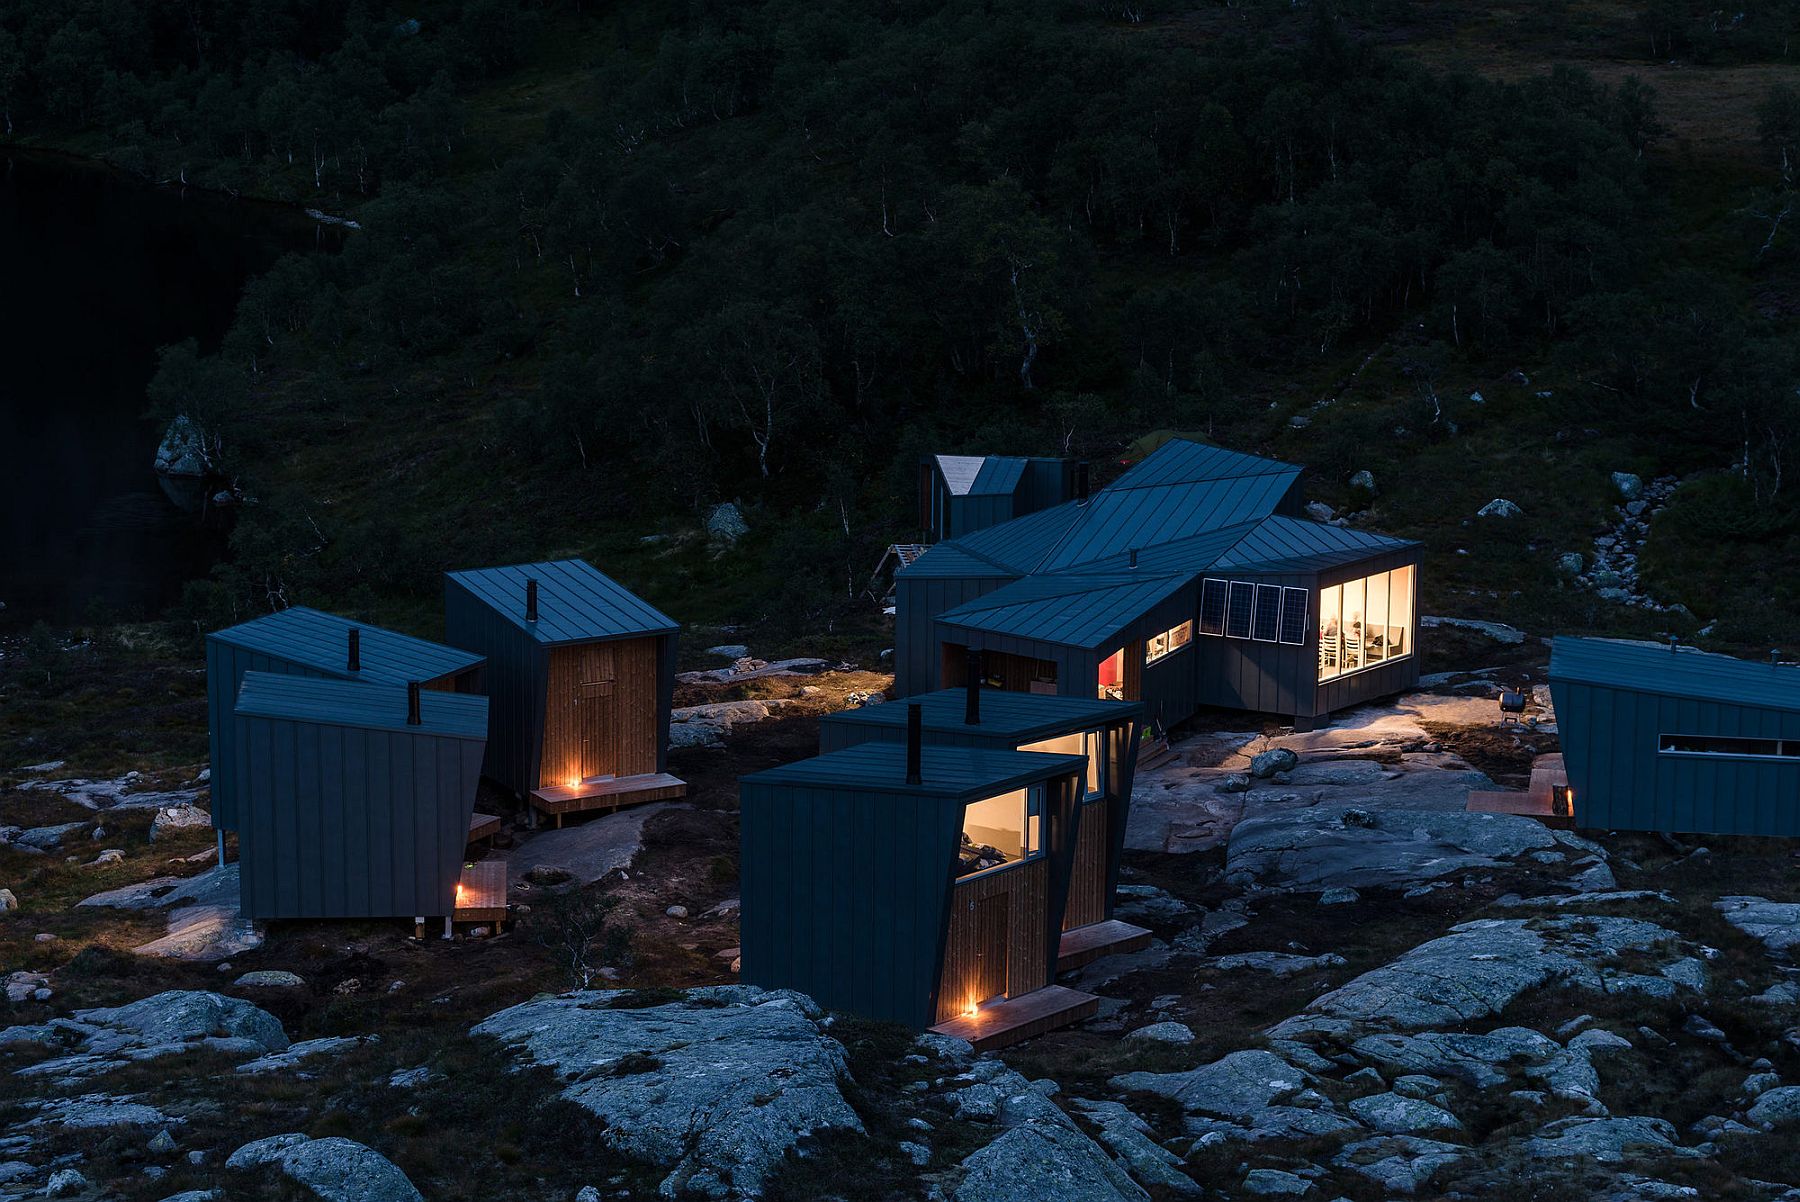 Awesome self-catering mountain lodges in Norway are nature lovers' dream!